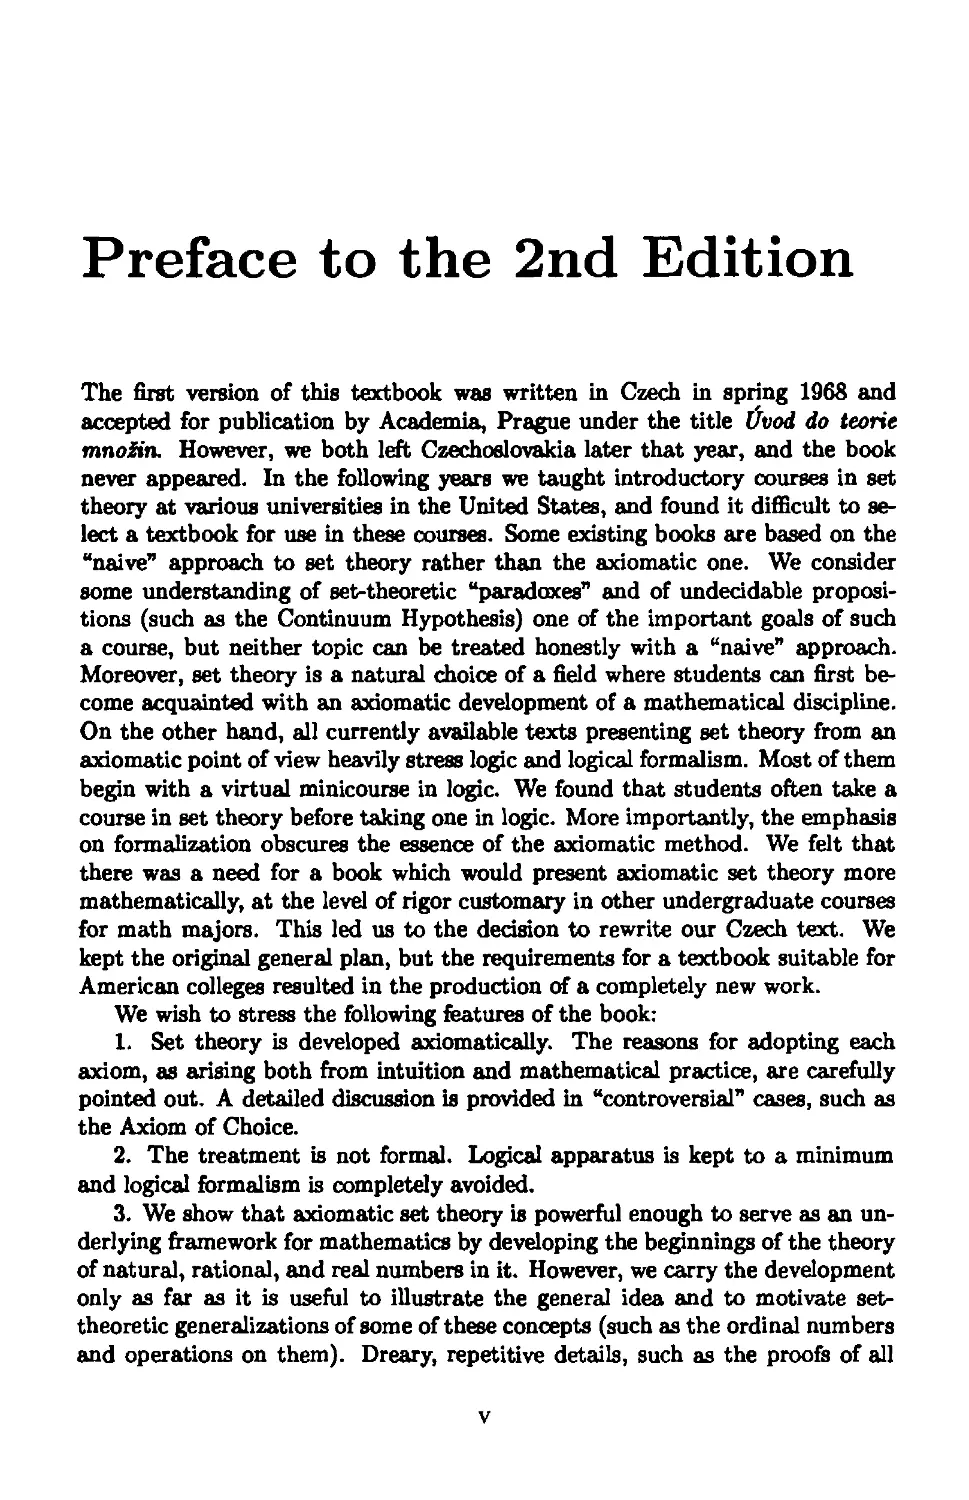 Preface to the Second Edition